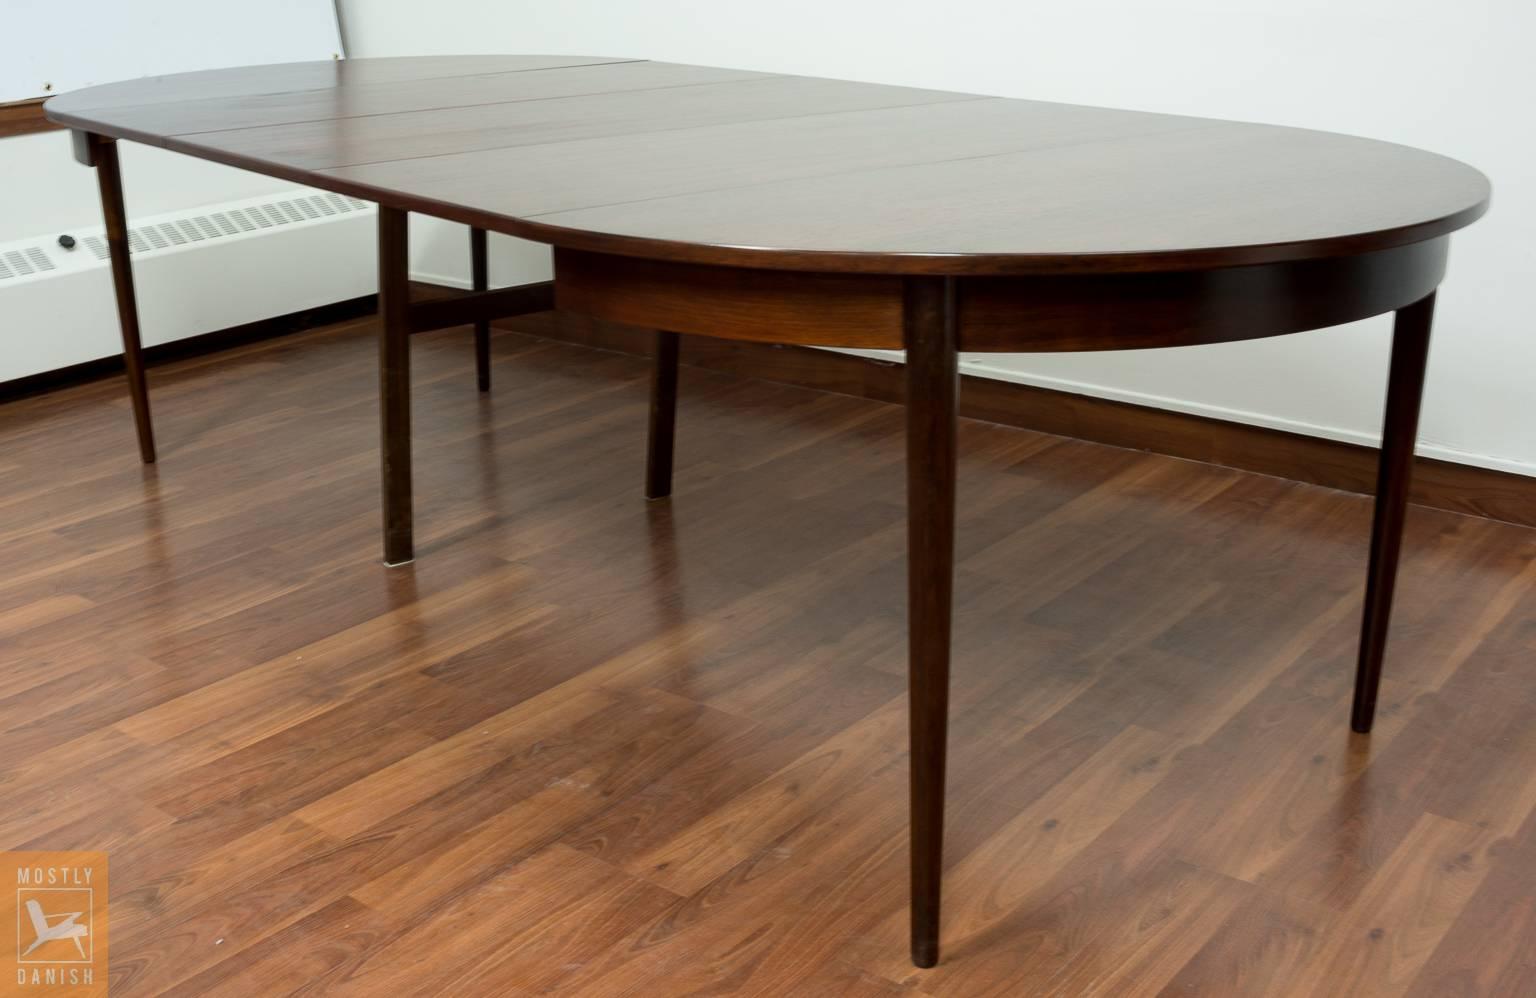 Round dining table veneered rosewood 73 cm x 118 cm, with five additional extension at 48 cm/ each, with a center leg support. Very rare rosewood table at this size.